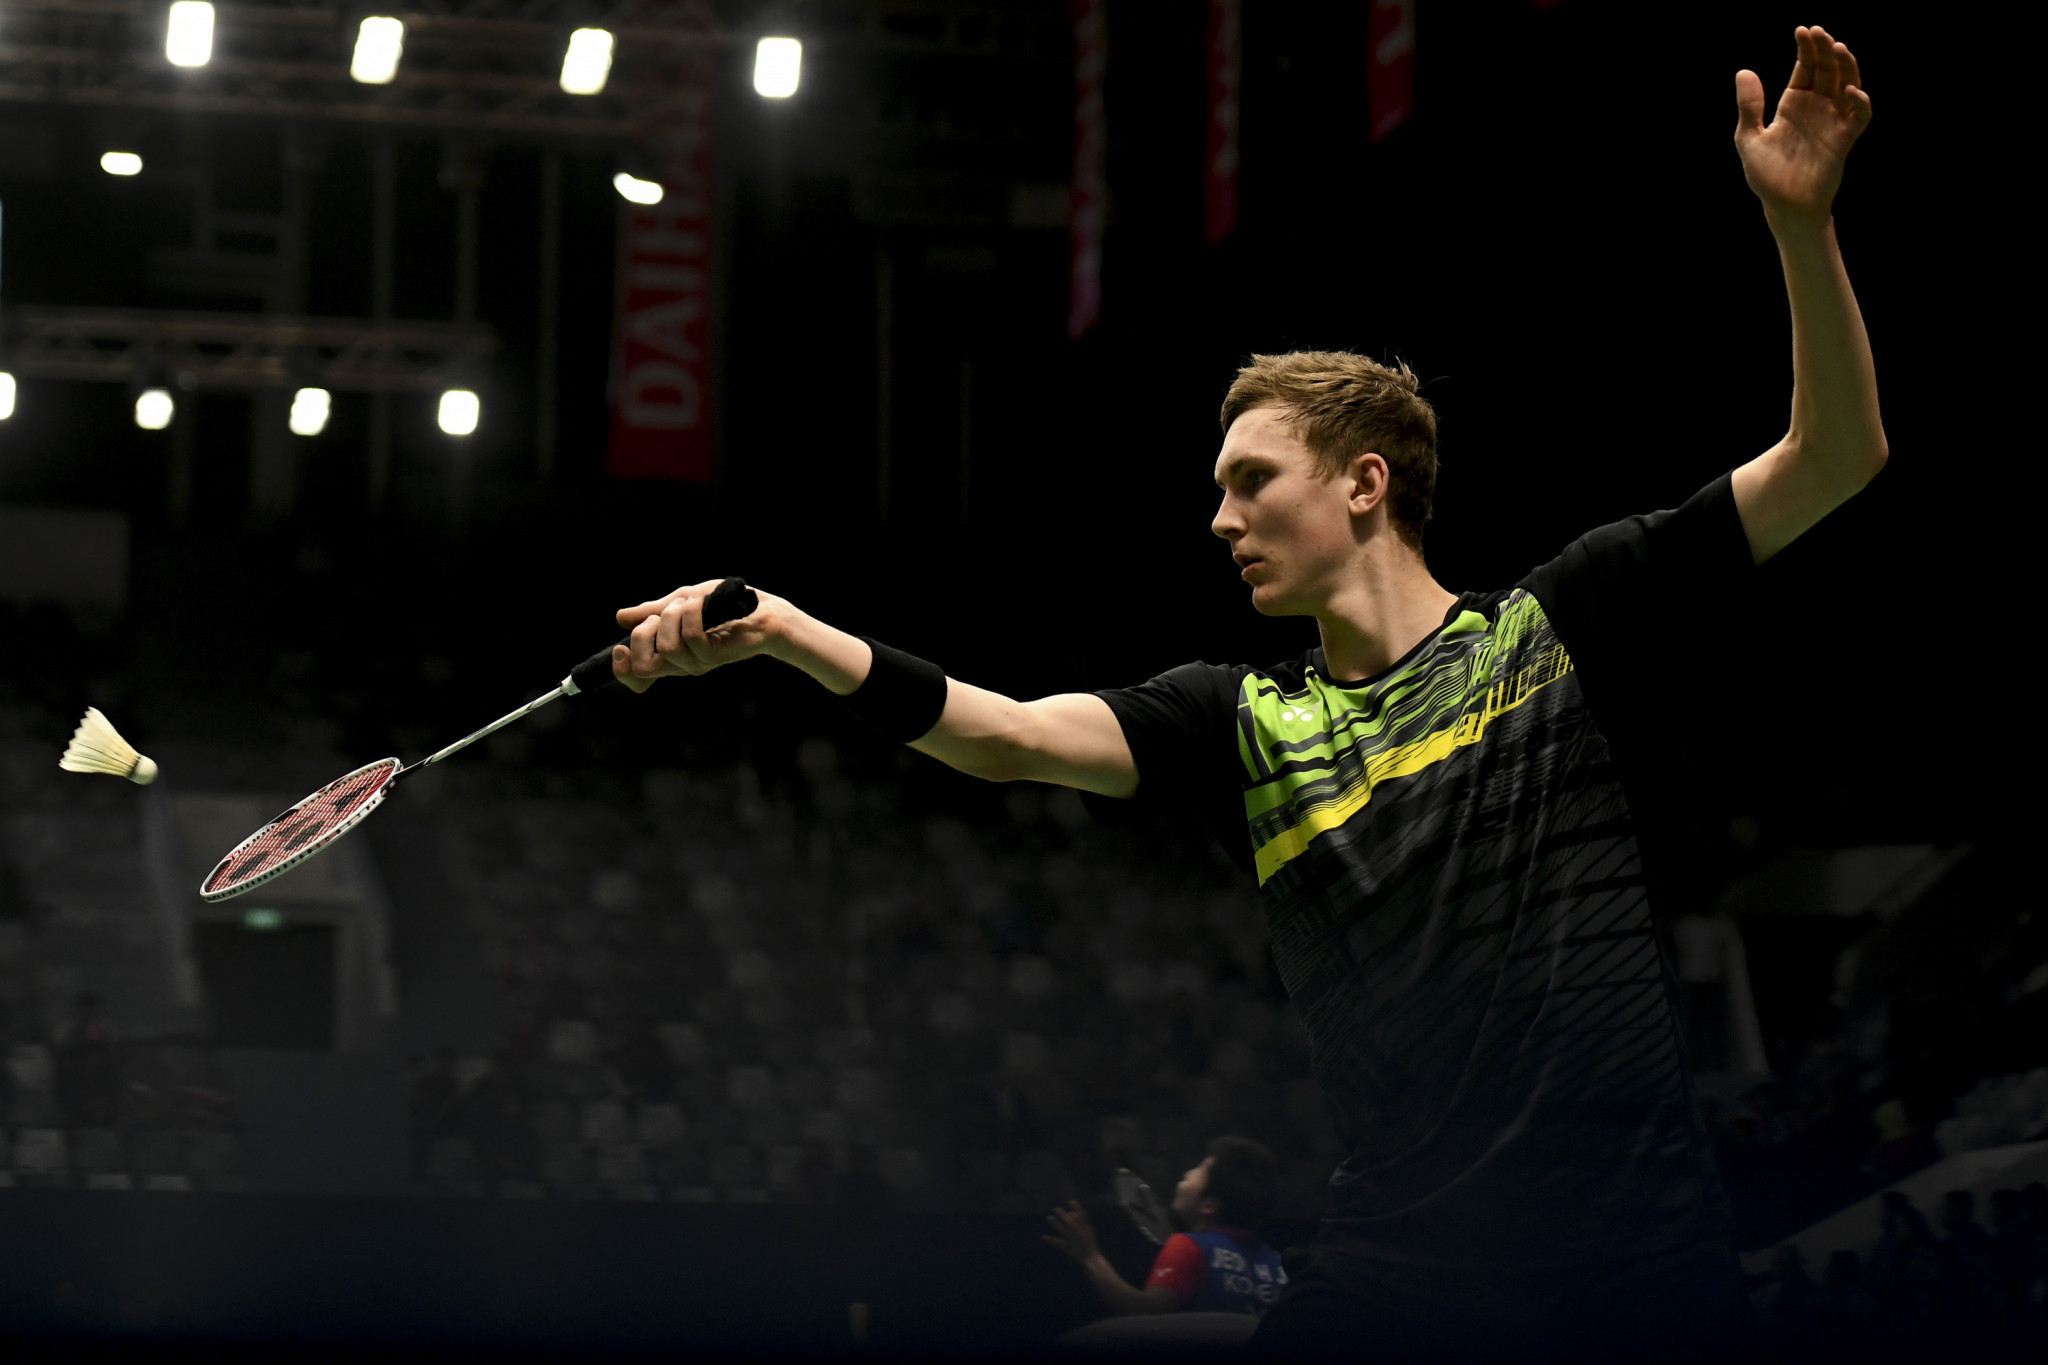 World champion Axelsen withdraws injured at BWF Indonesia Masters